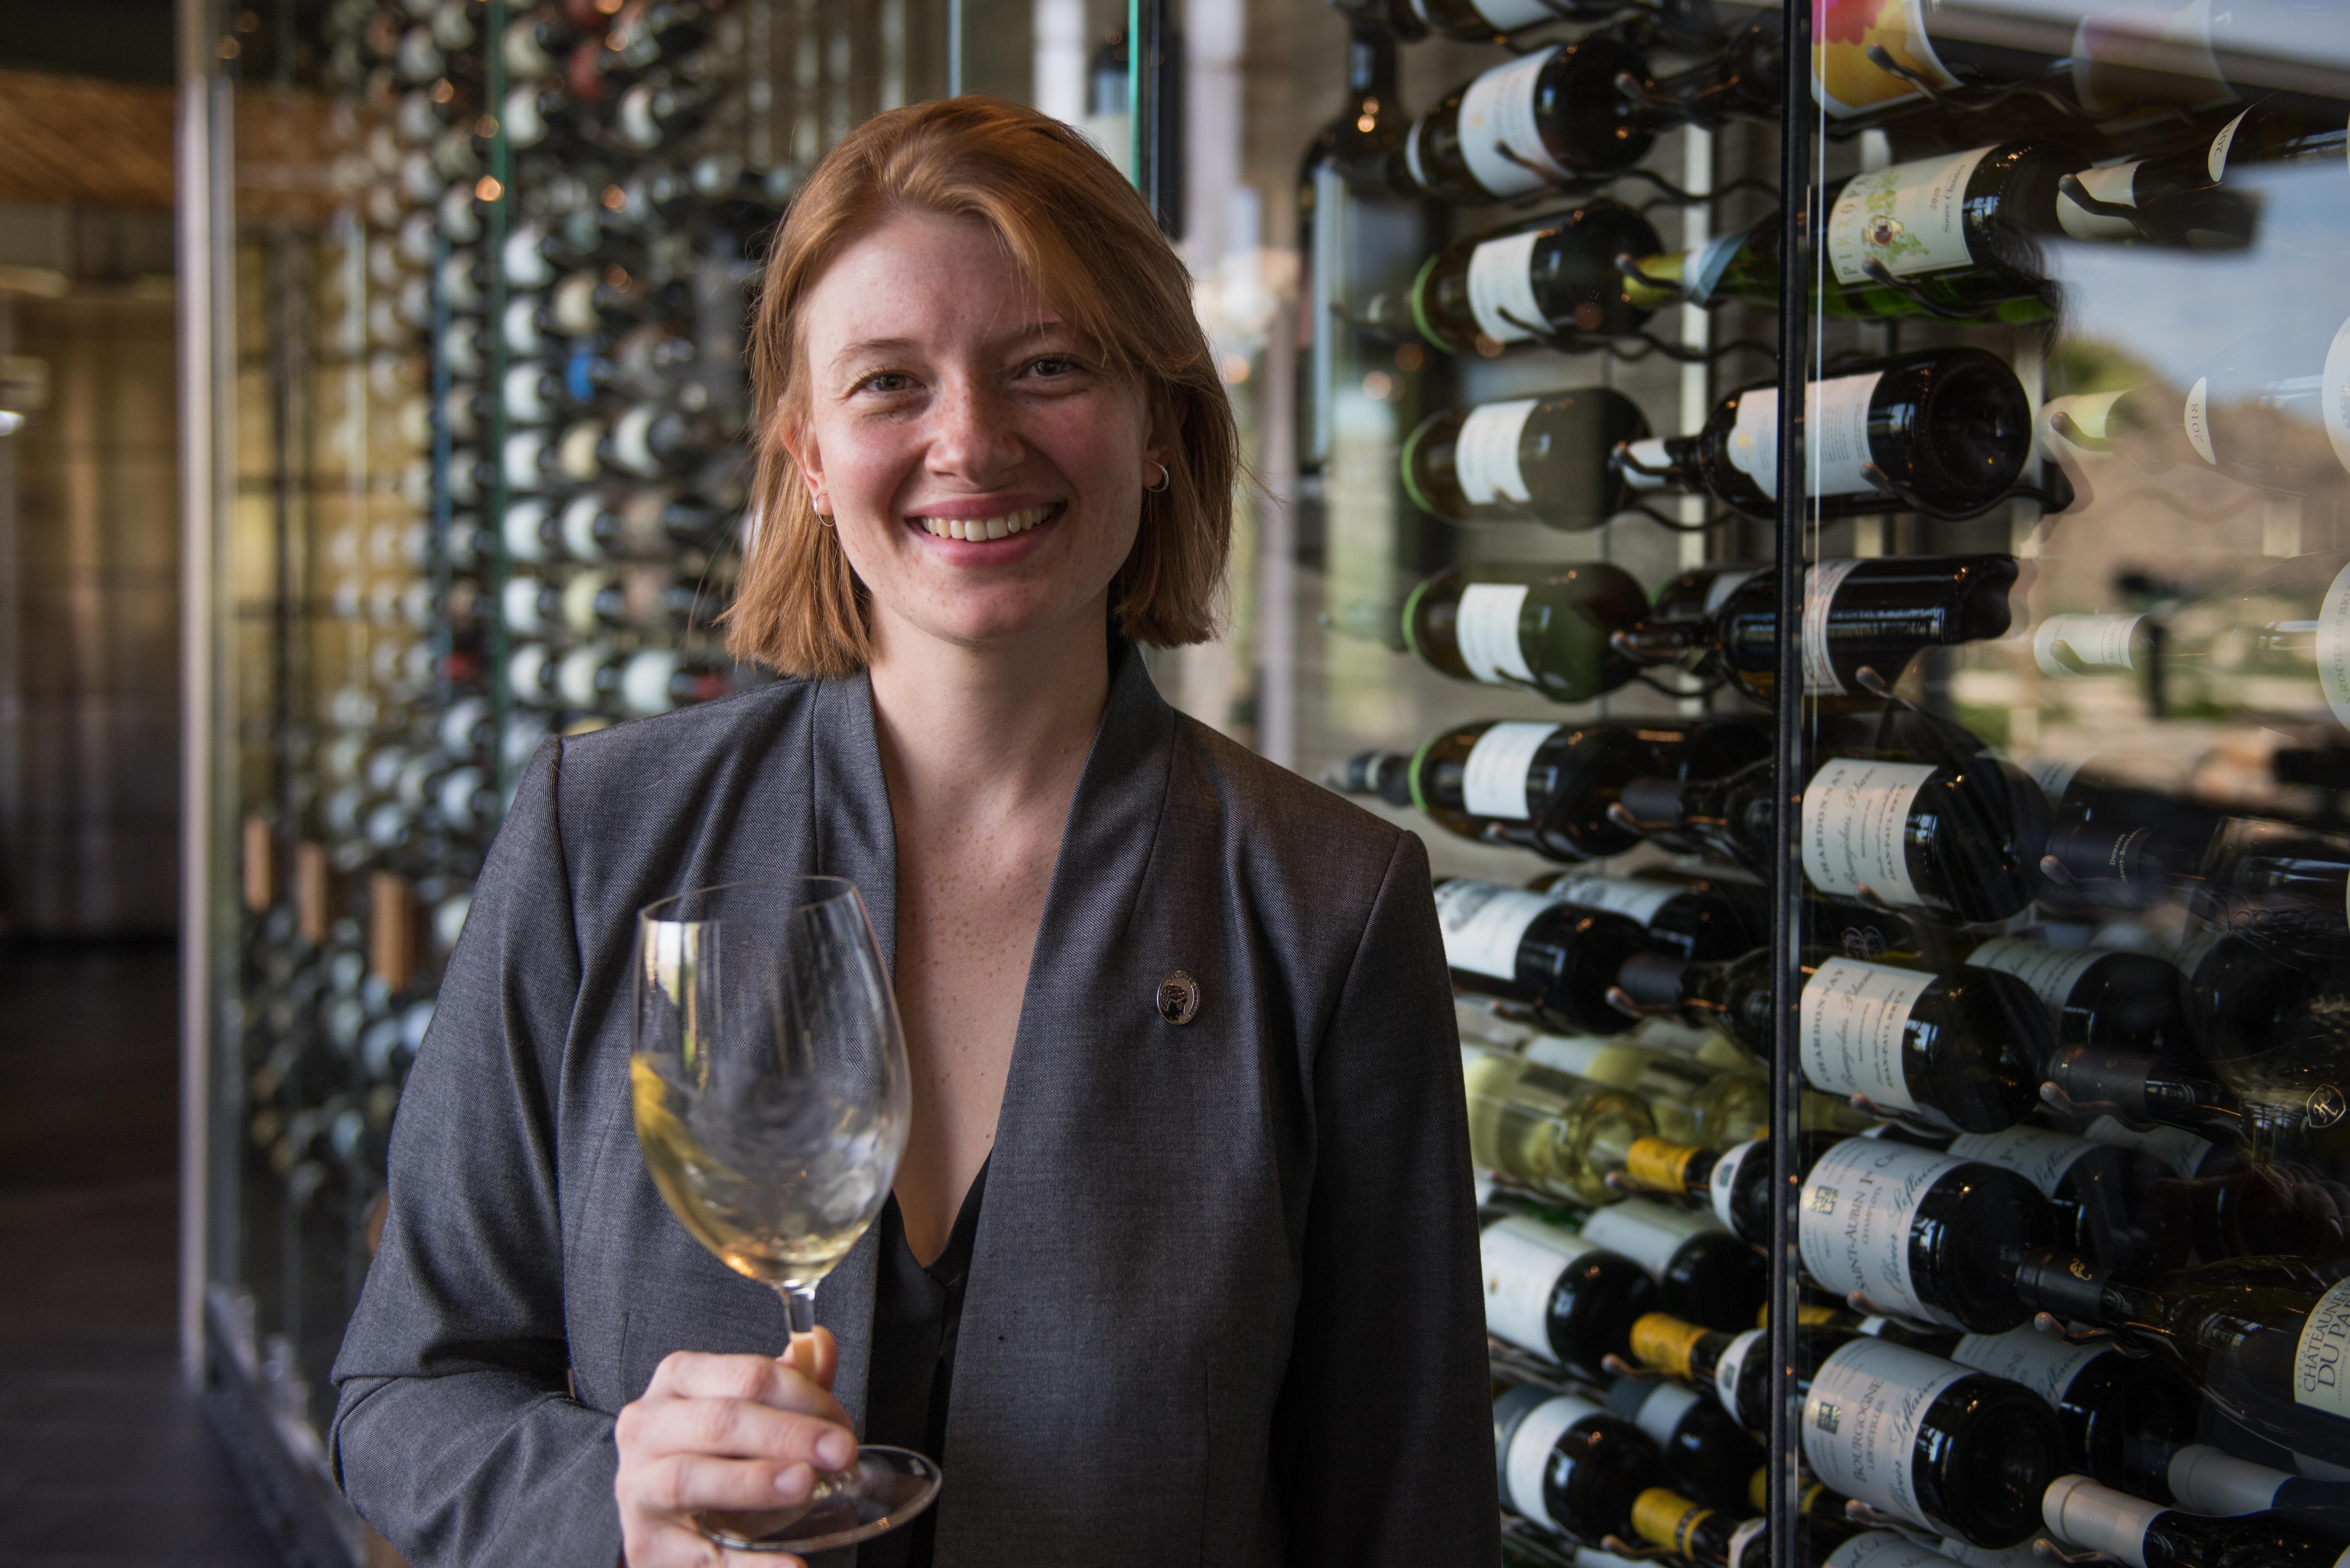 Sanctuary Sommelier Laura Bruno in a grey blazer swirling a glass of white wine.